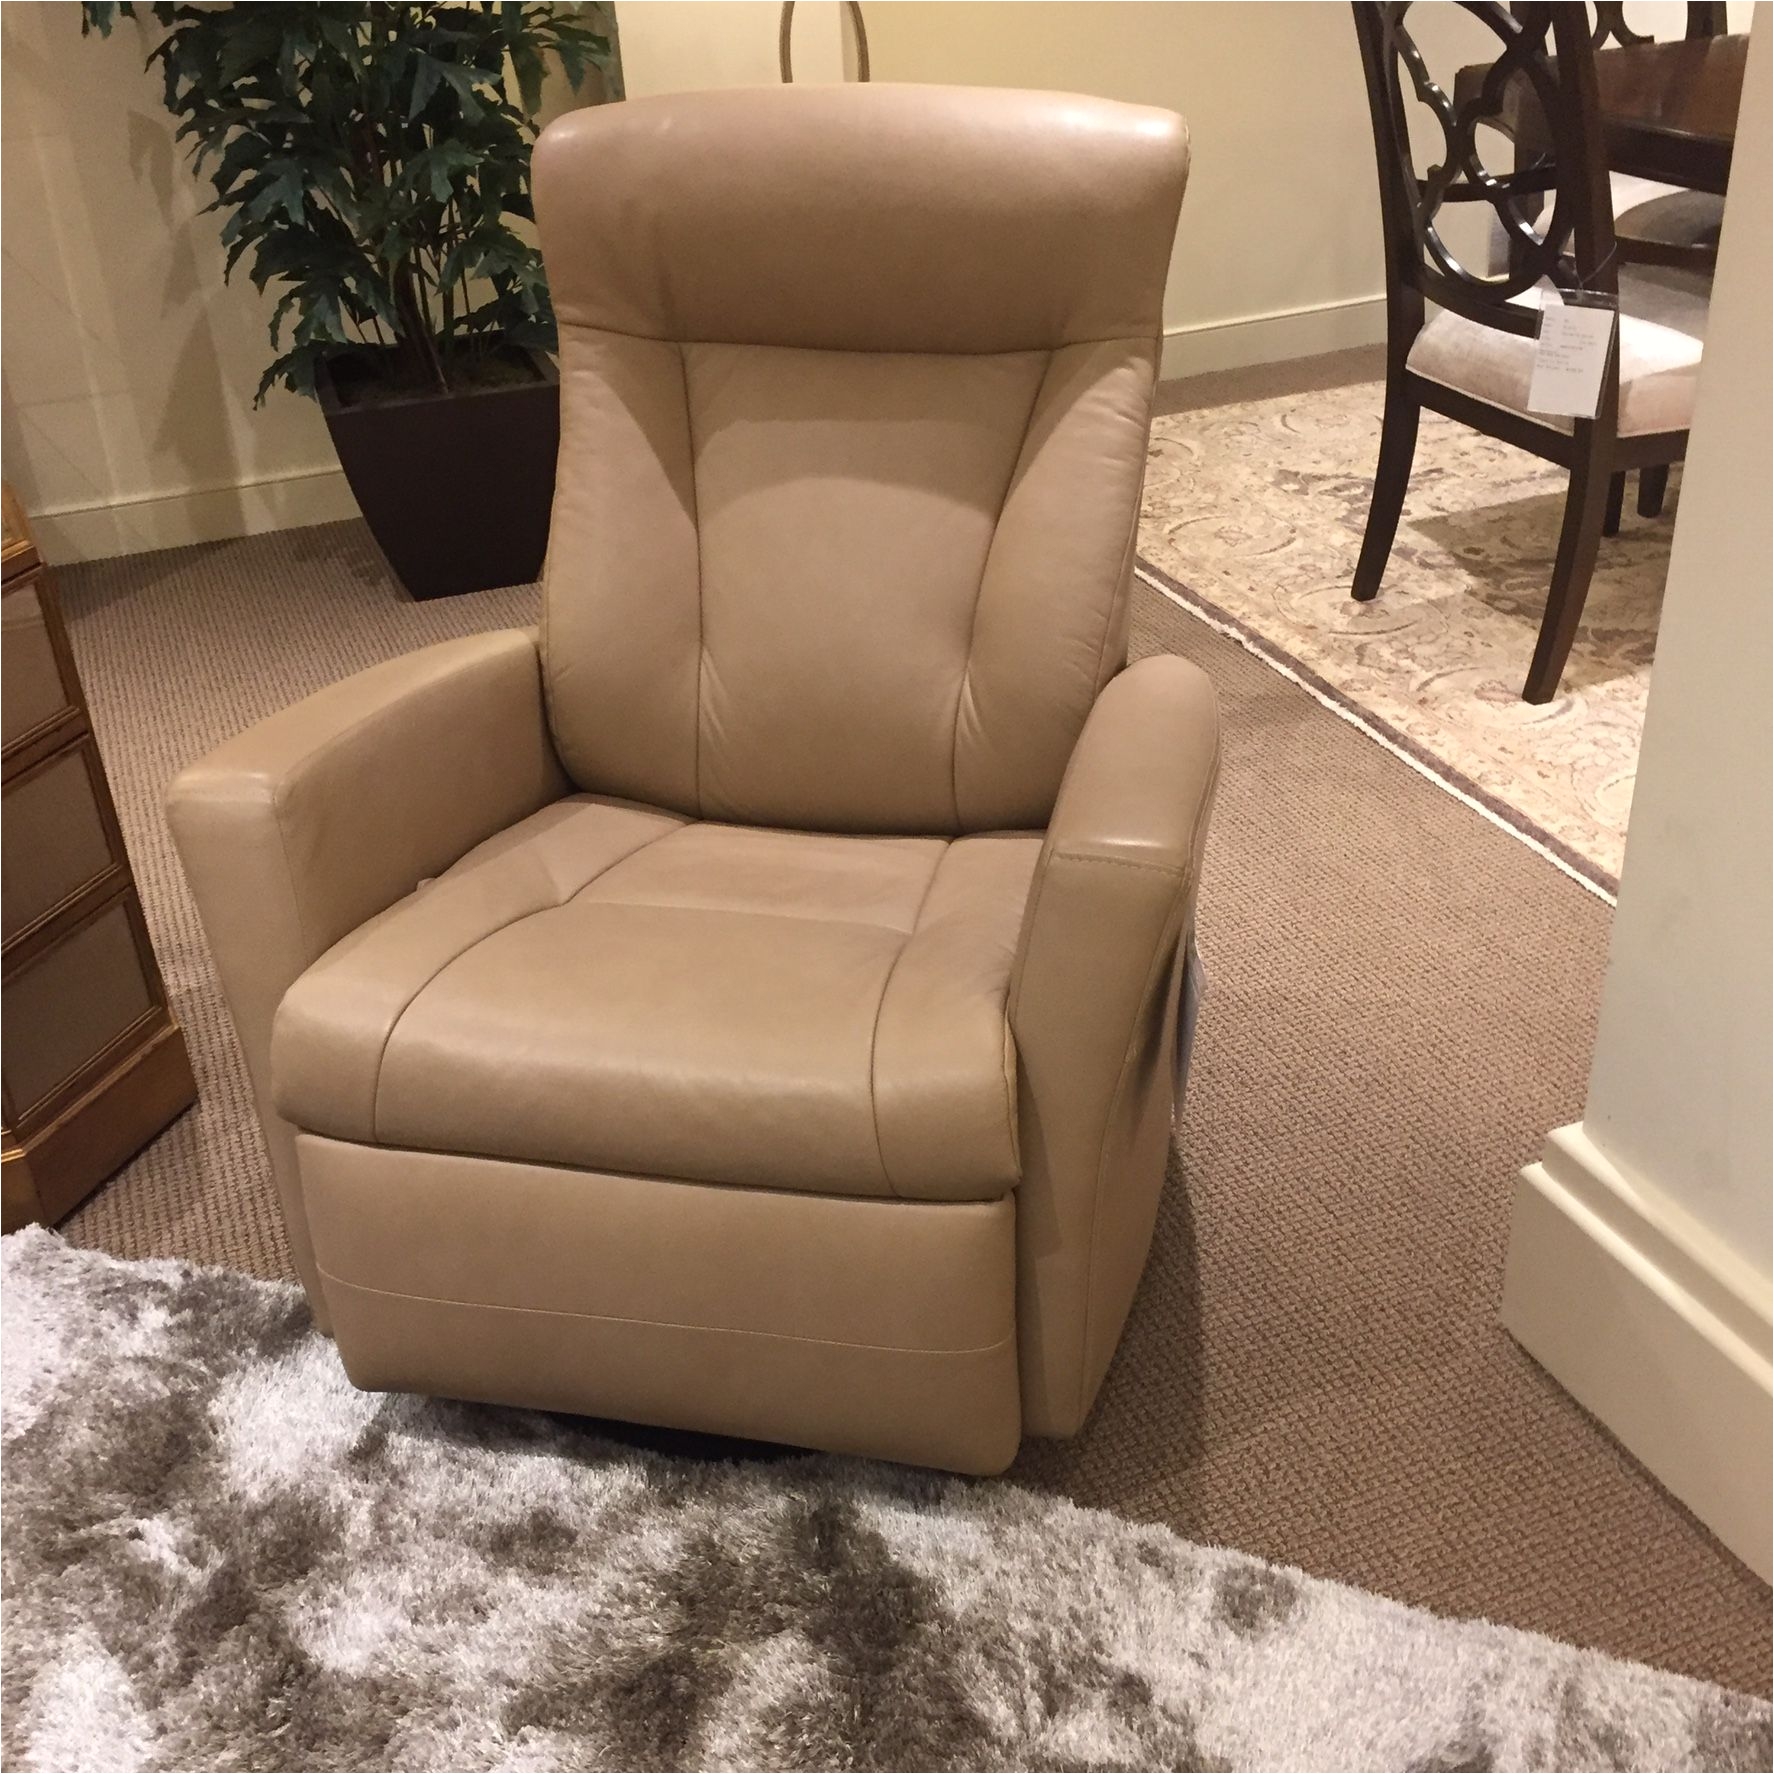 img of norway recliner that bob likes need in a darker color